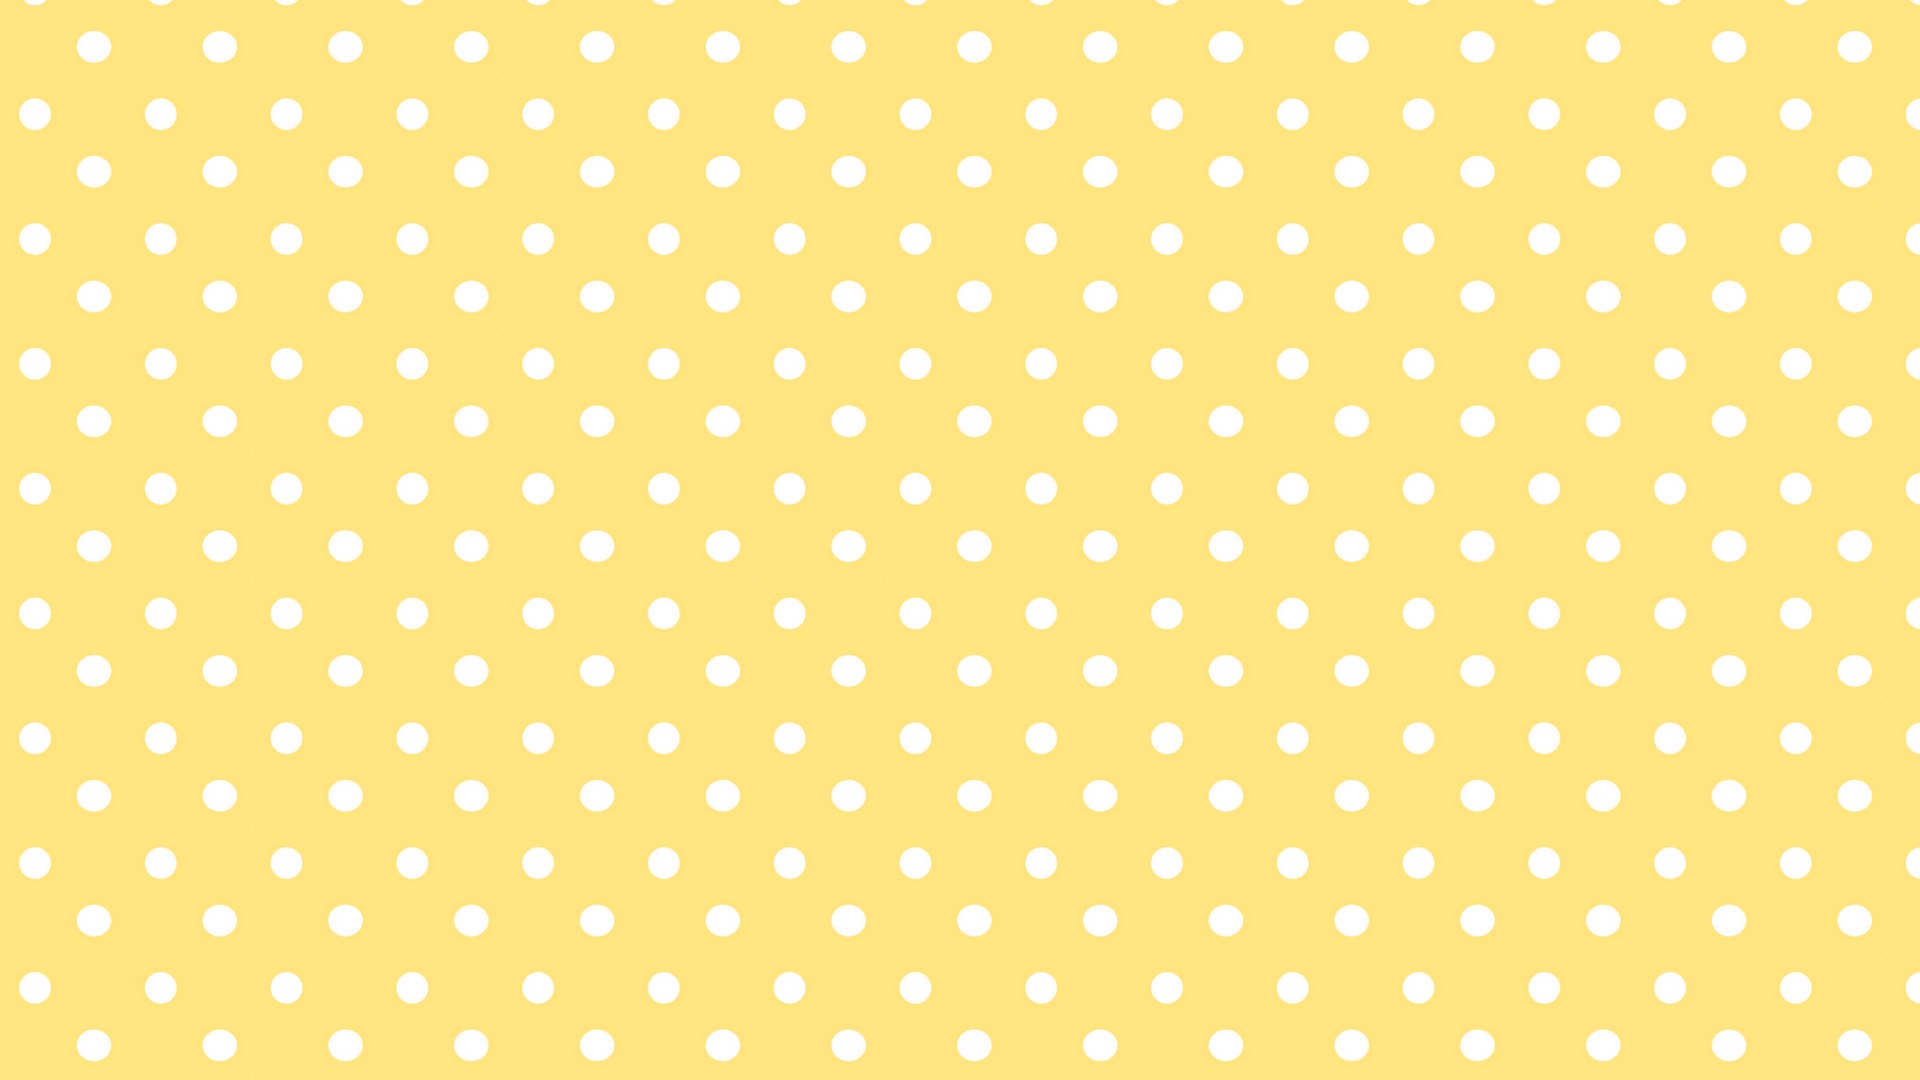 Wallpaper Yellow Theme Desktop with image resolution 1920x1080 pixel. You can use this wallpaper as background for your desktop Computer Screensavers, Android or iPhone smartphones